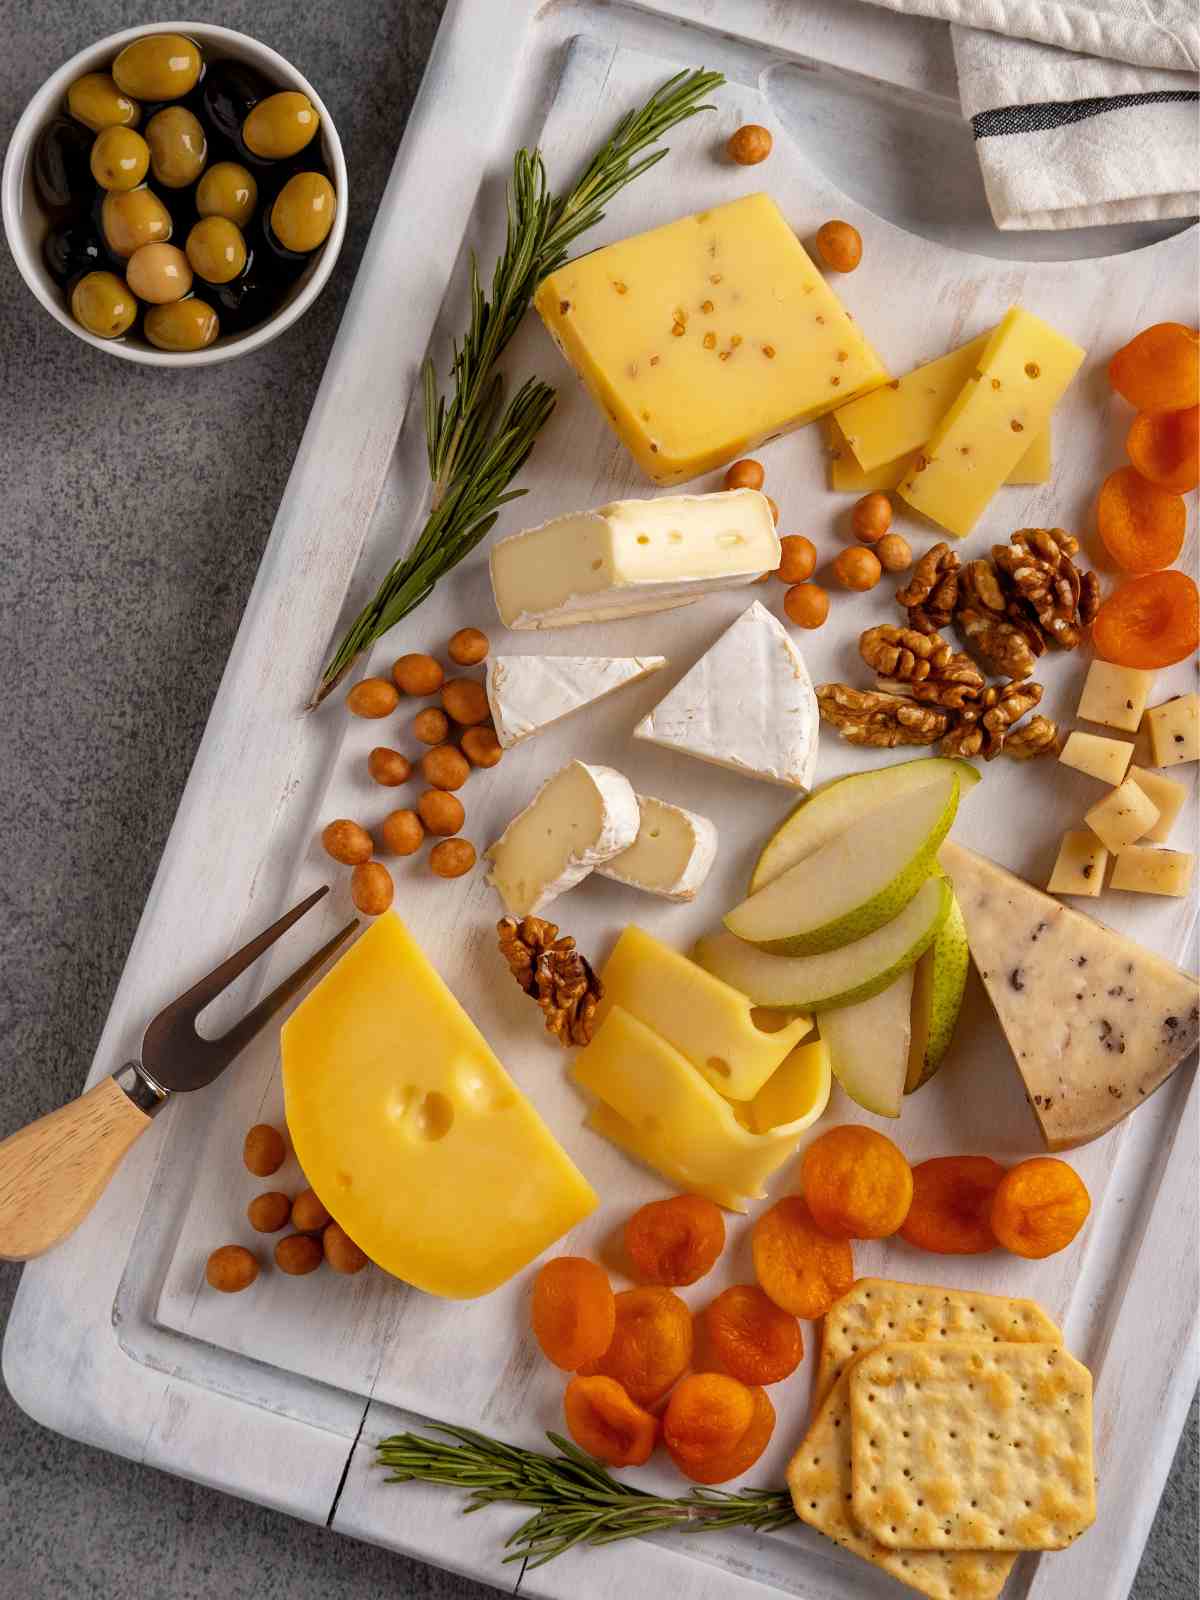 Fontina Cheese Replacement Ideas for Gourmet Cheese Boards